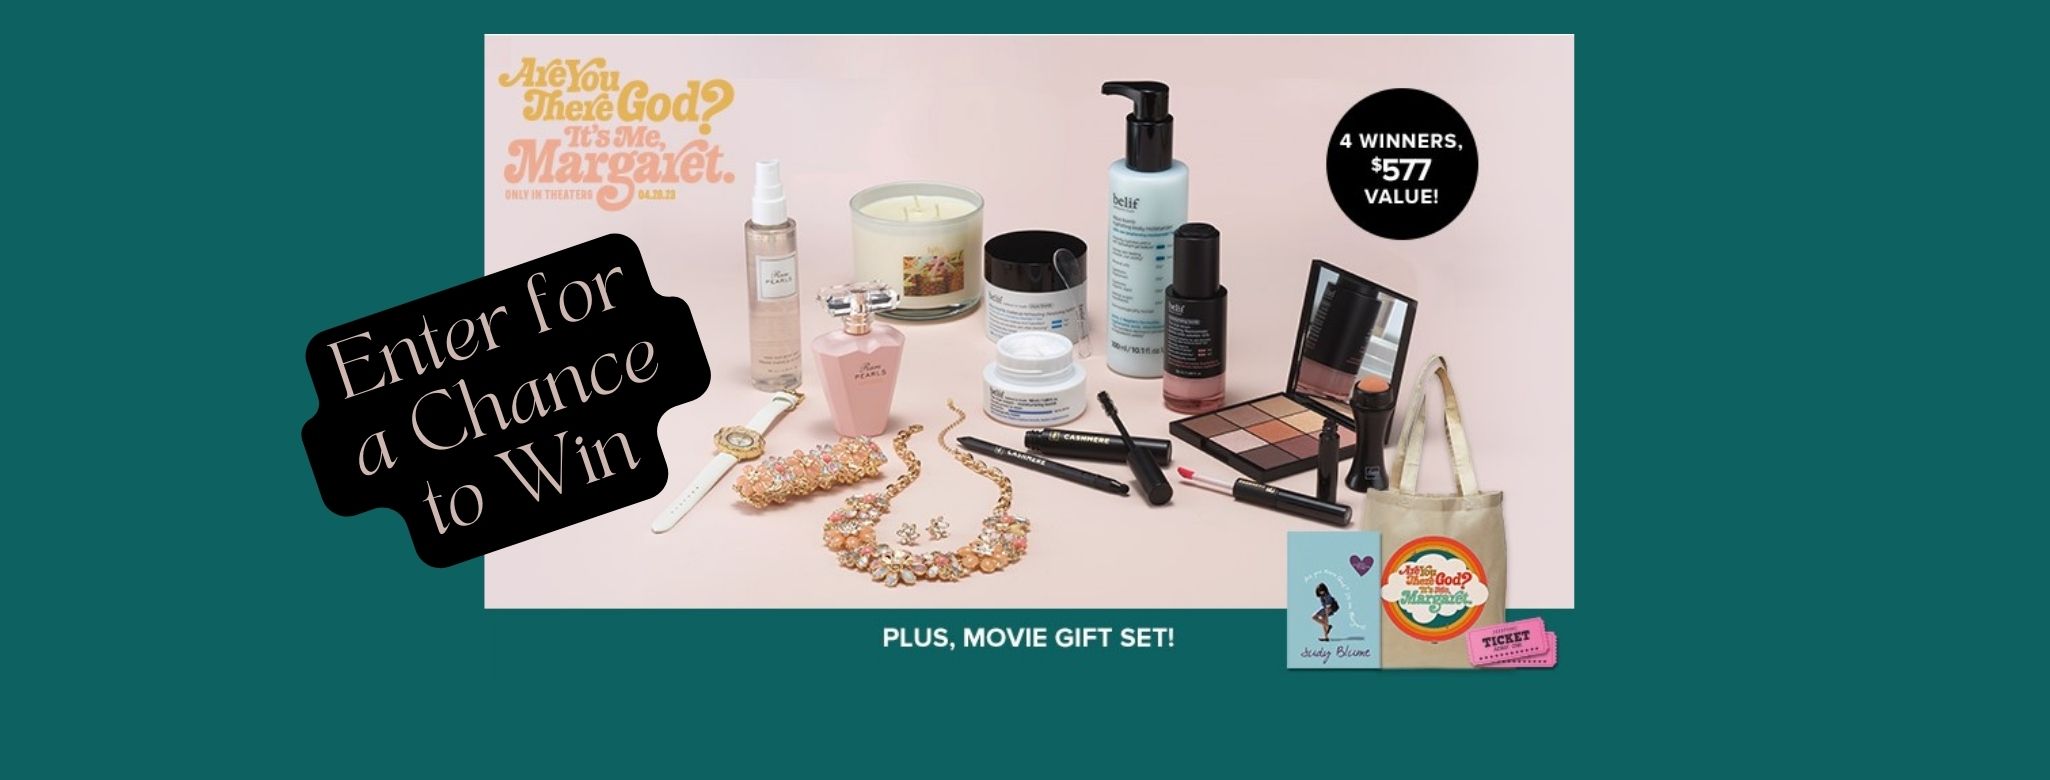 Only the Best for Mom Sweepstakes